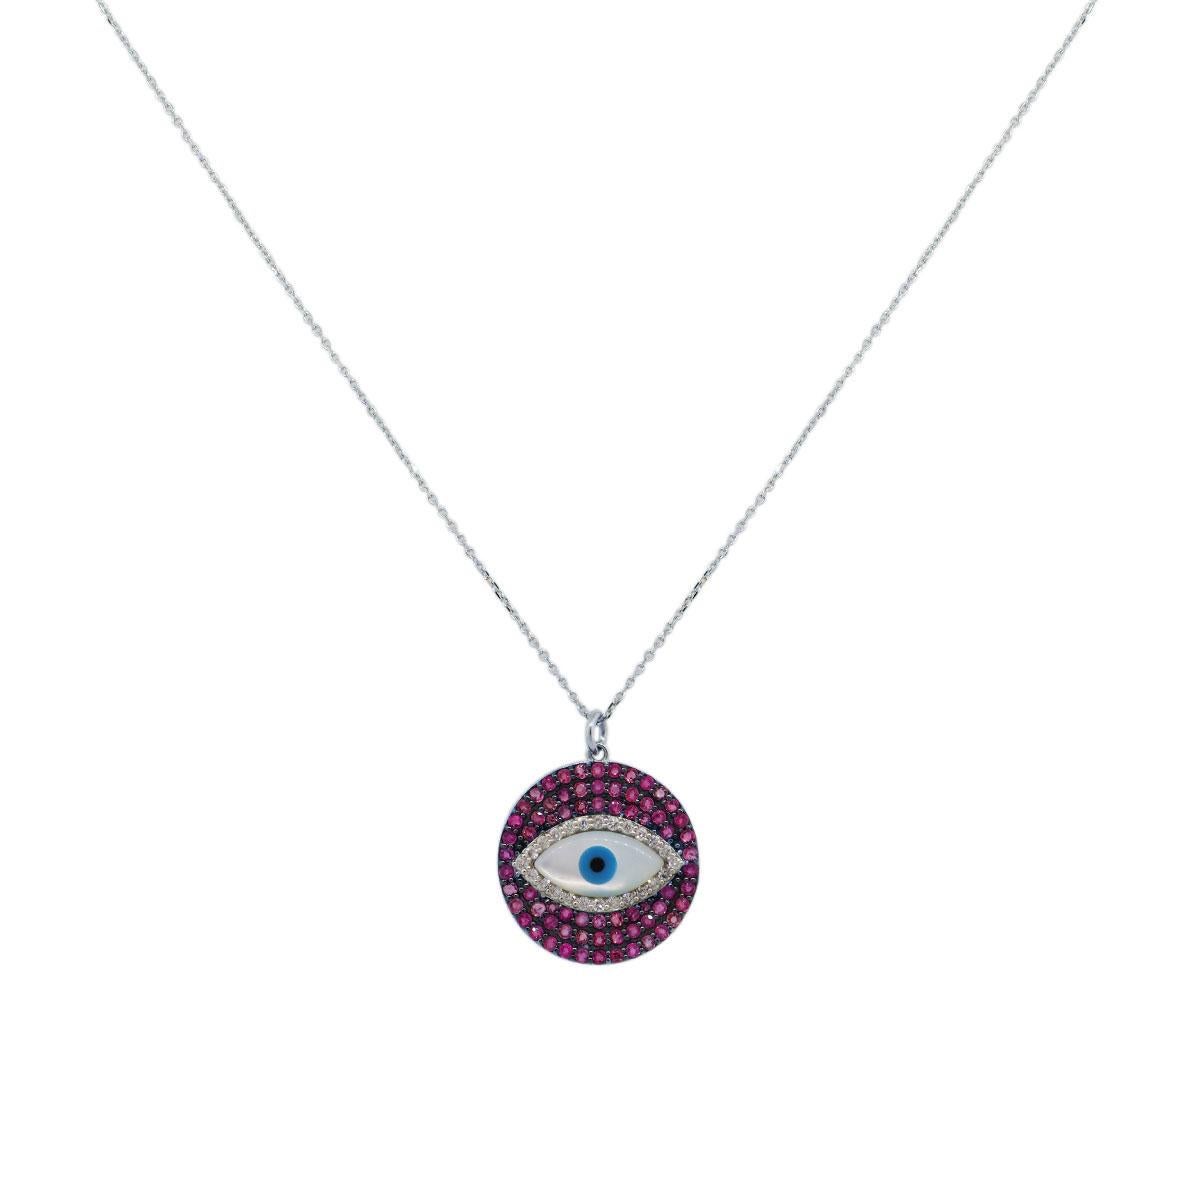 Material: 14k white gold
Diamond Details: Approximately 0.31ctw of round brilliant diamonds. Diamonds are G/H in color and VS in clarity
Gemstone Details: Approximately 1.64ctw of round shape rubies
Measurements: Necklace measures 17.25″ in